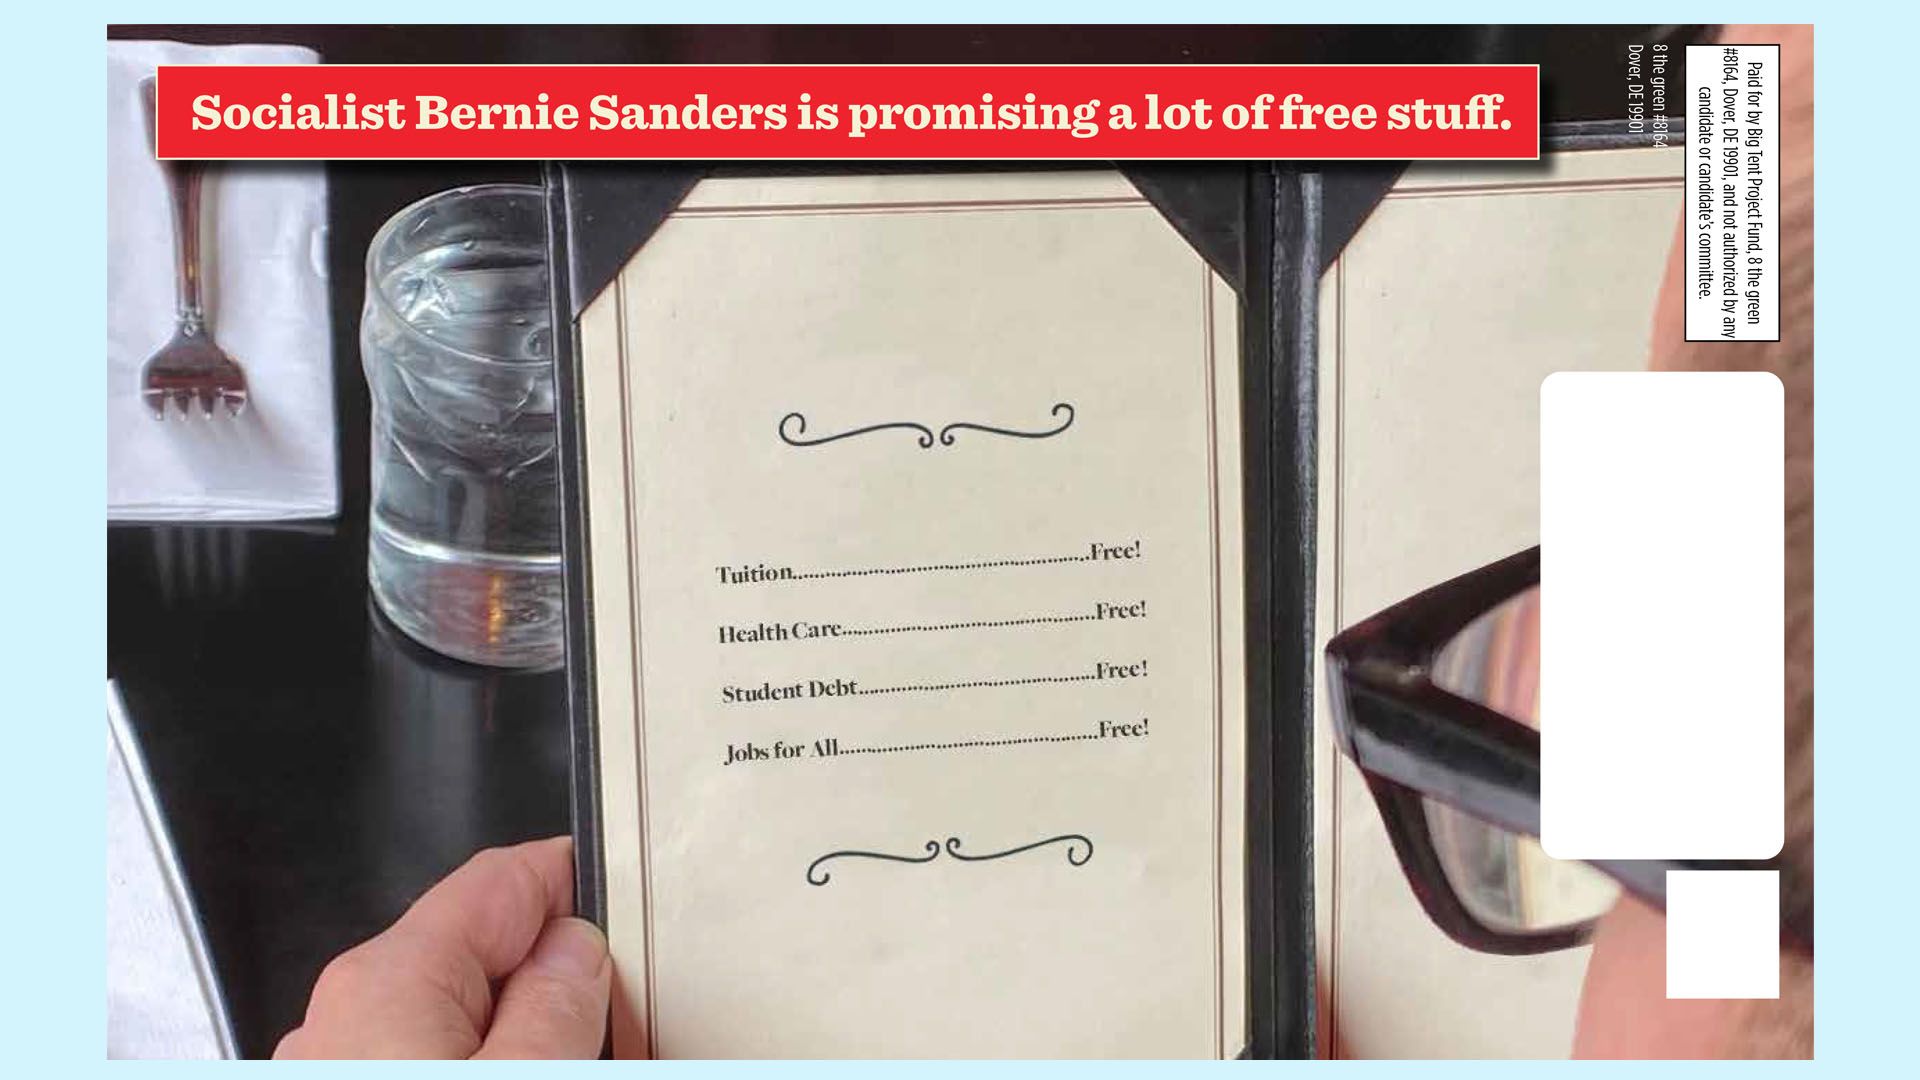 A photo of a mailer that says "Socialist Bernie Sanders promises a lot of free stuff"